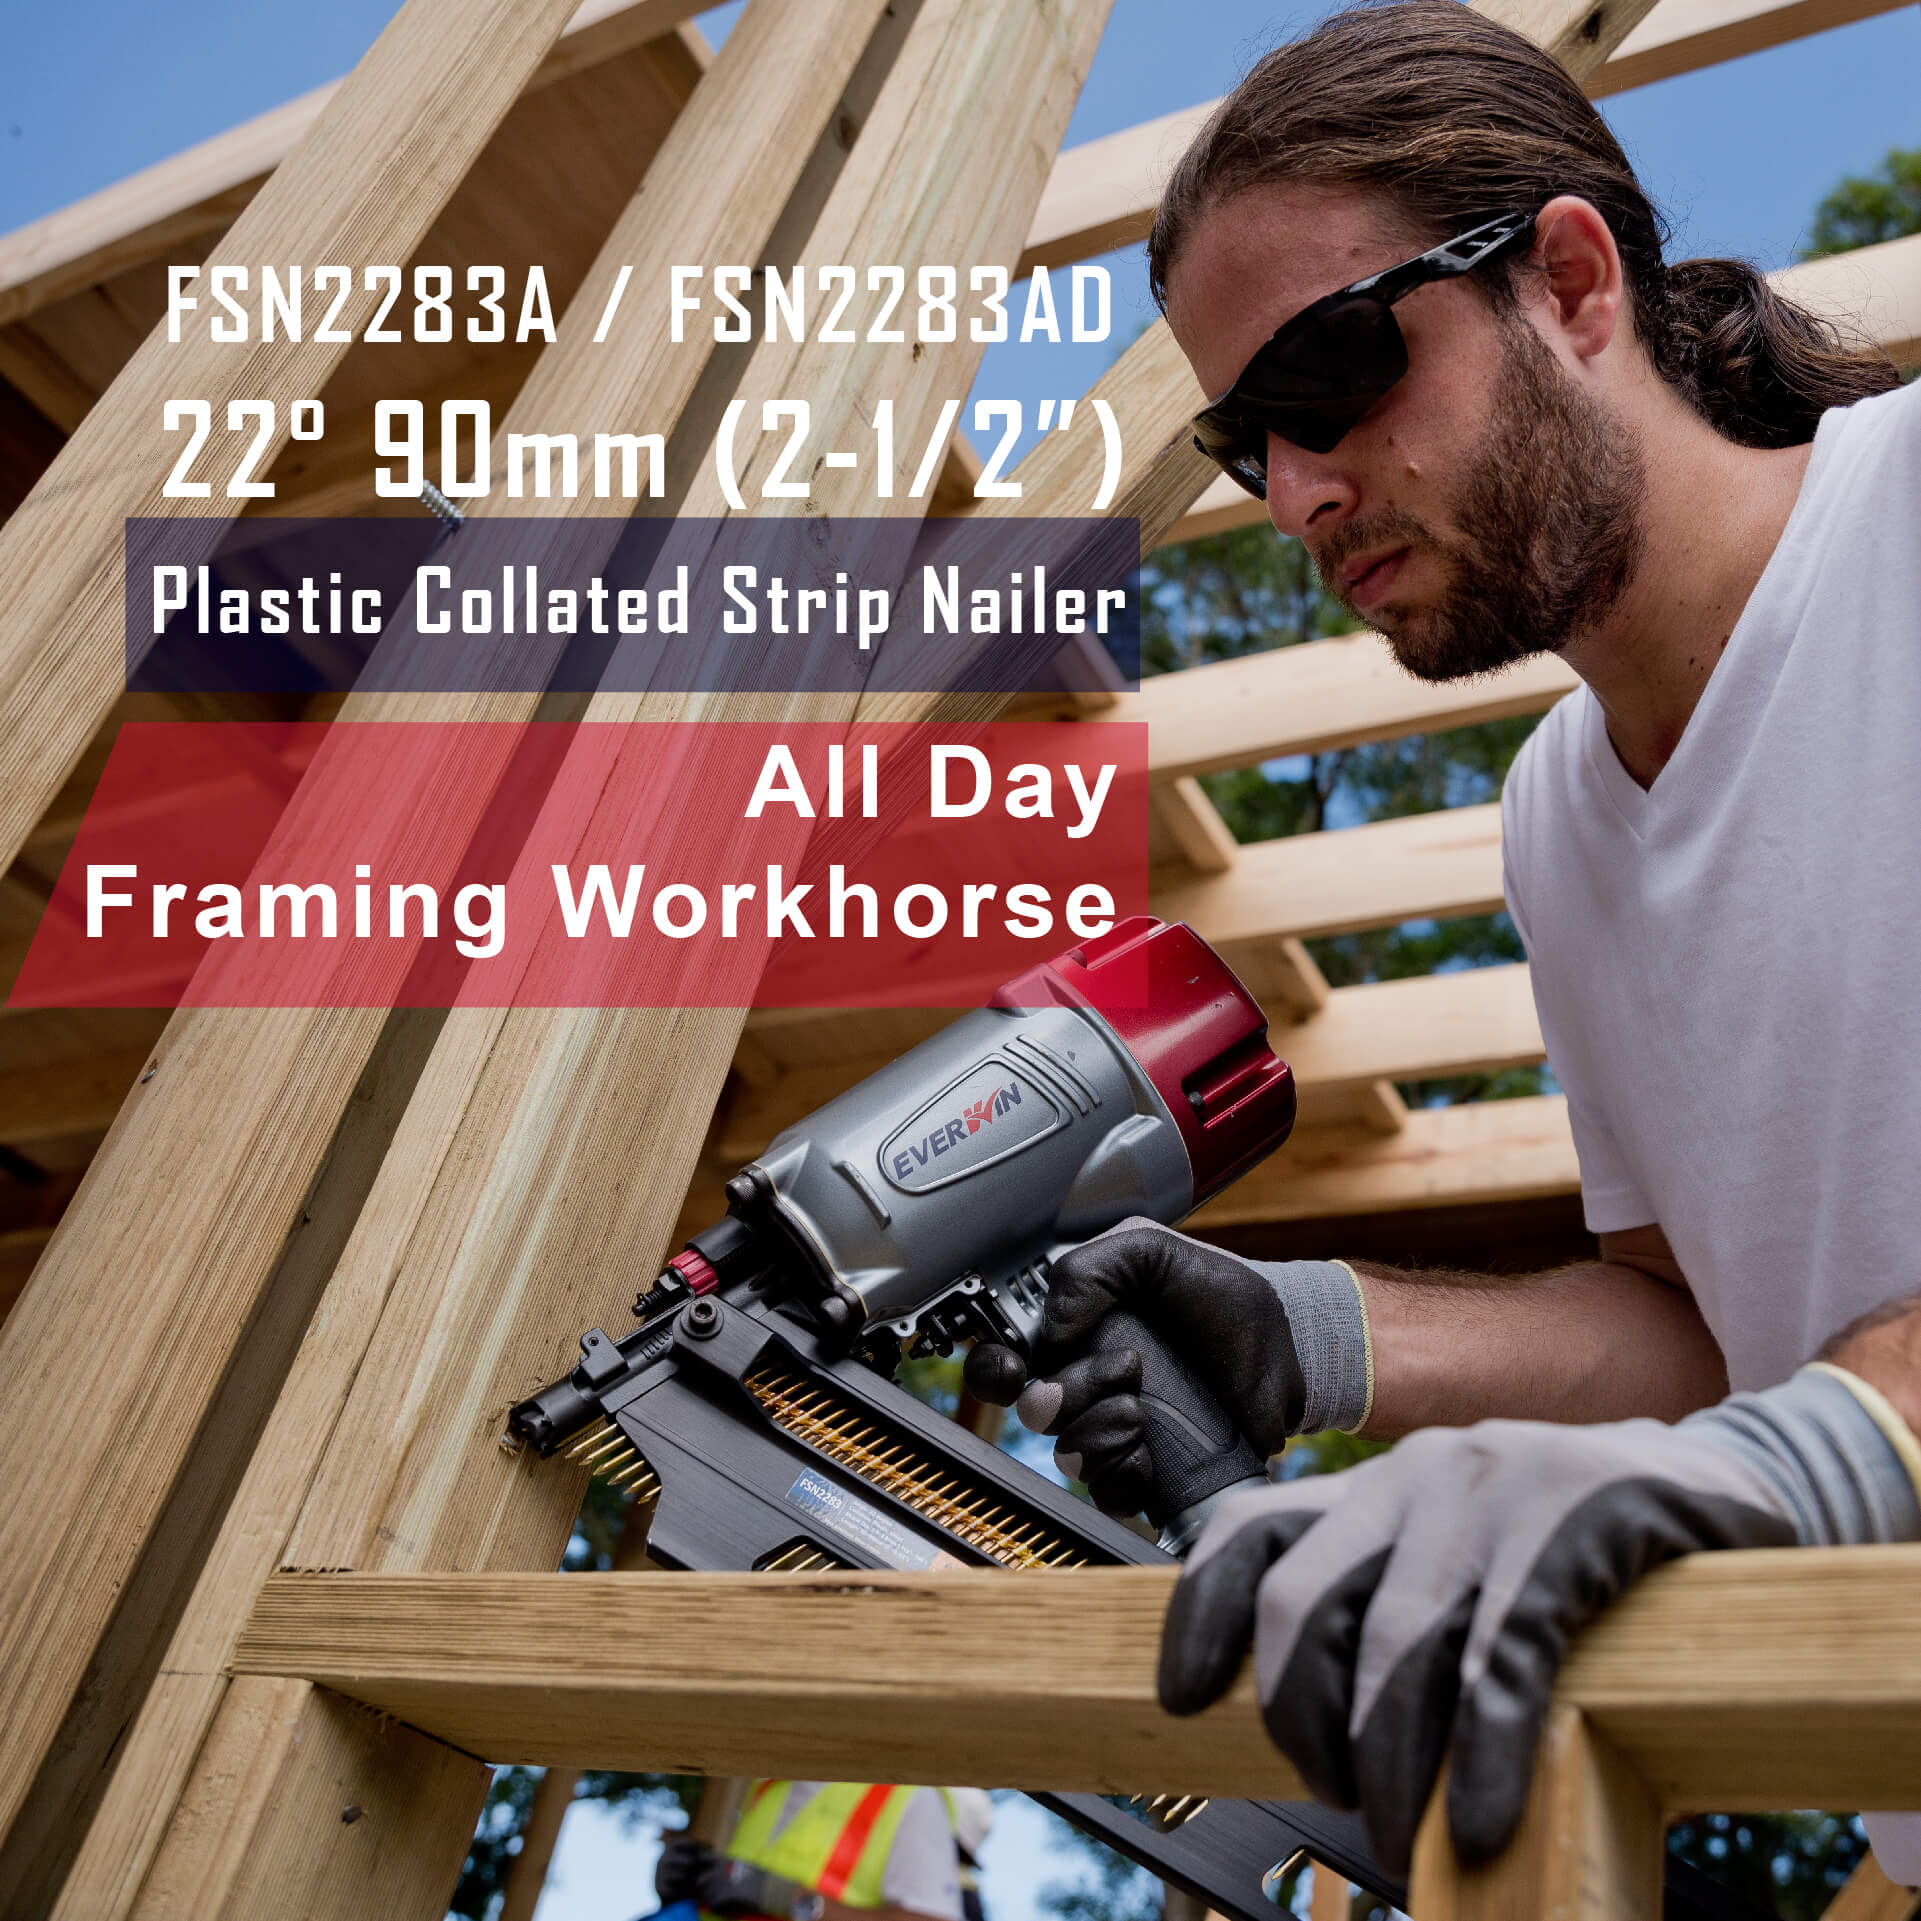 Classic Workhorse Framing Nailer Re-engineered by EVERWIN - The FSN2283AD